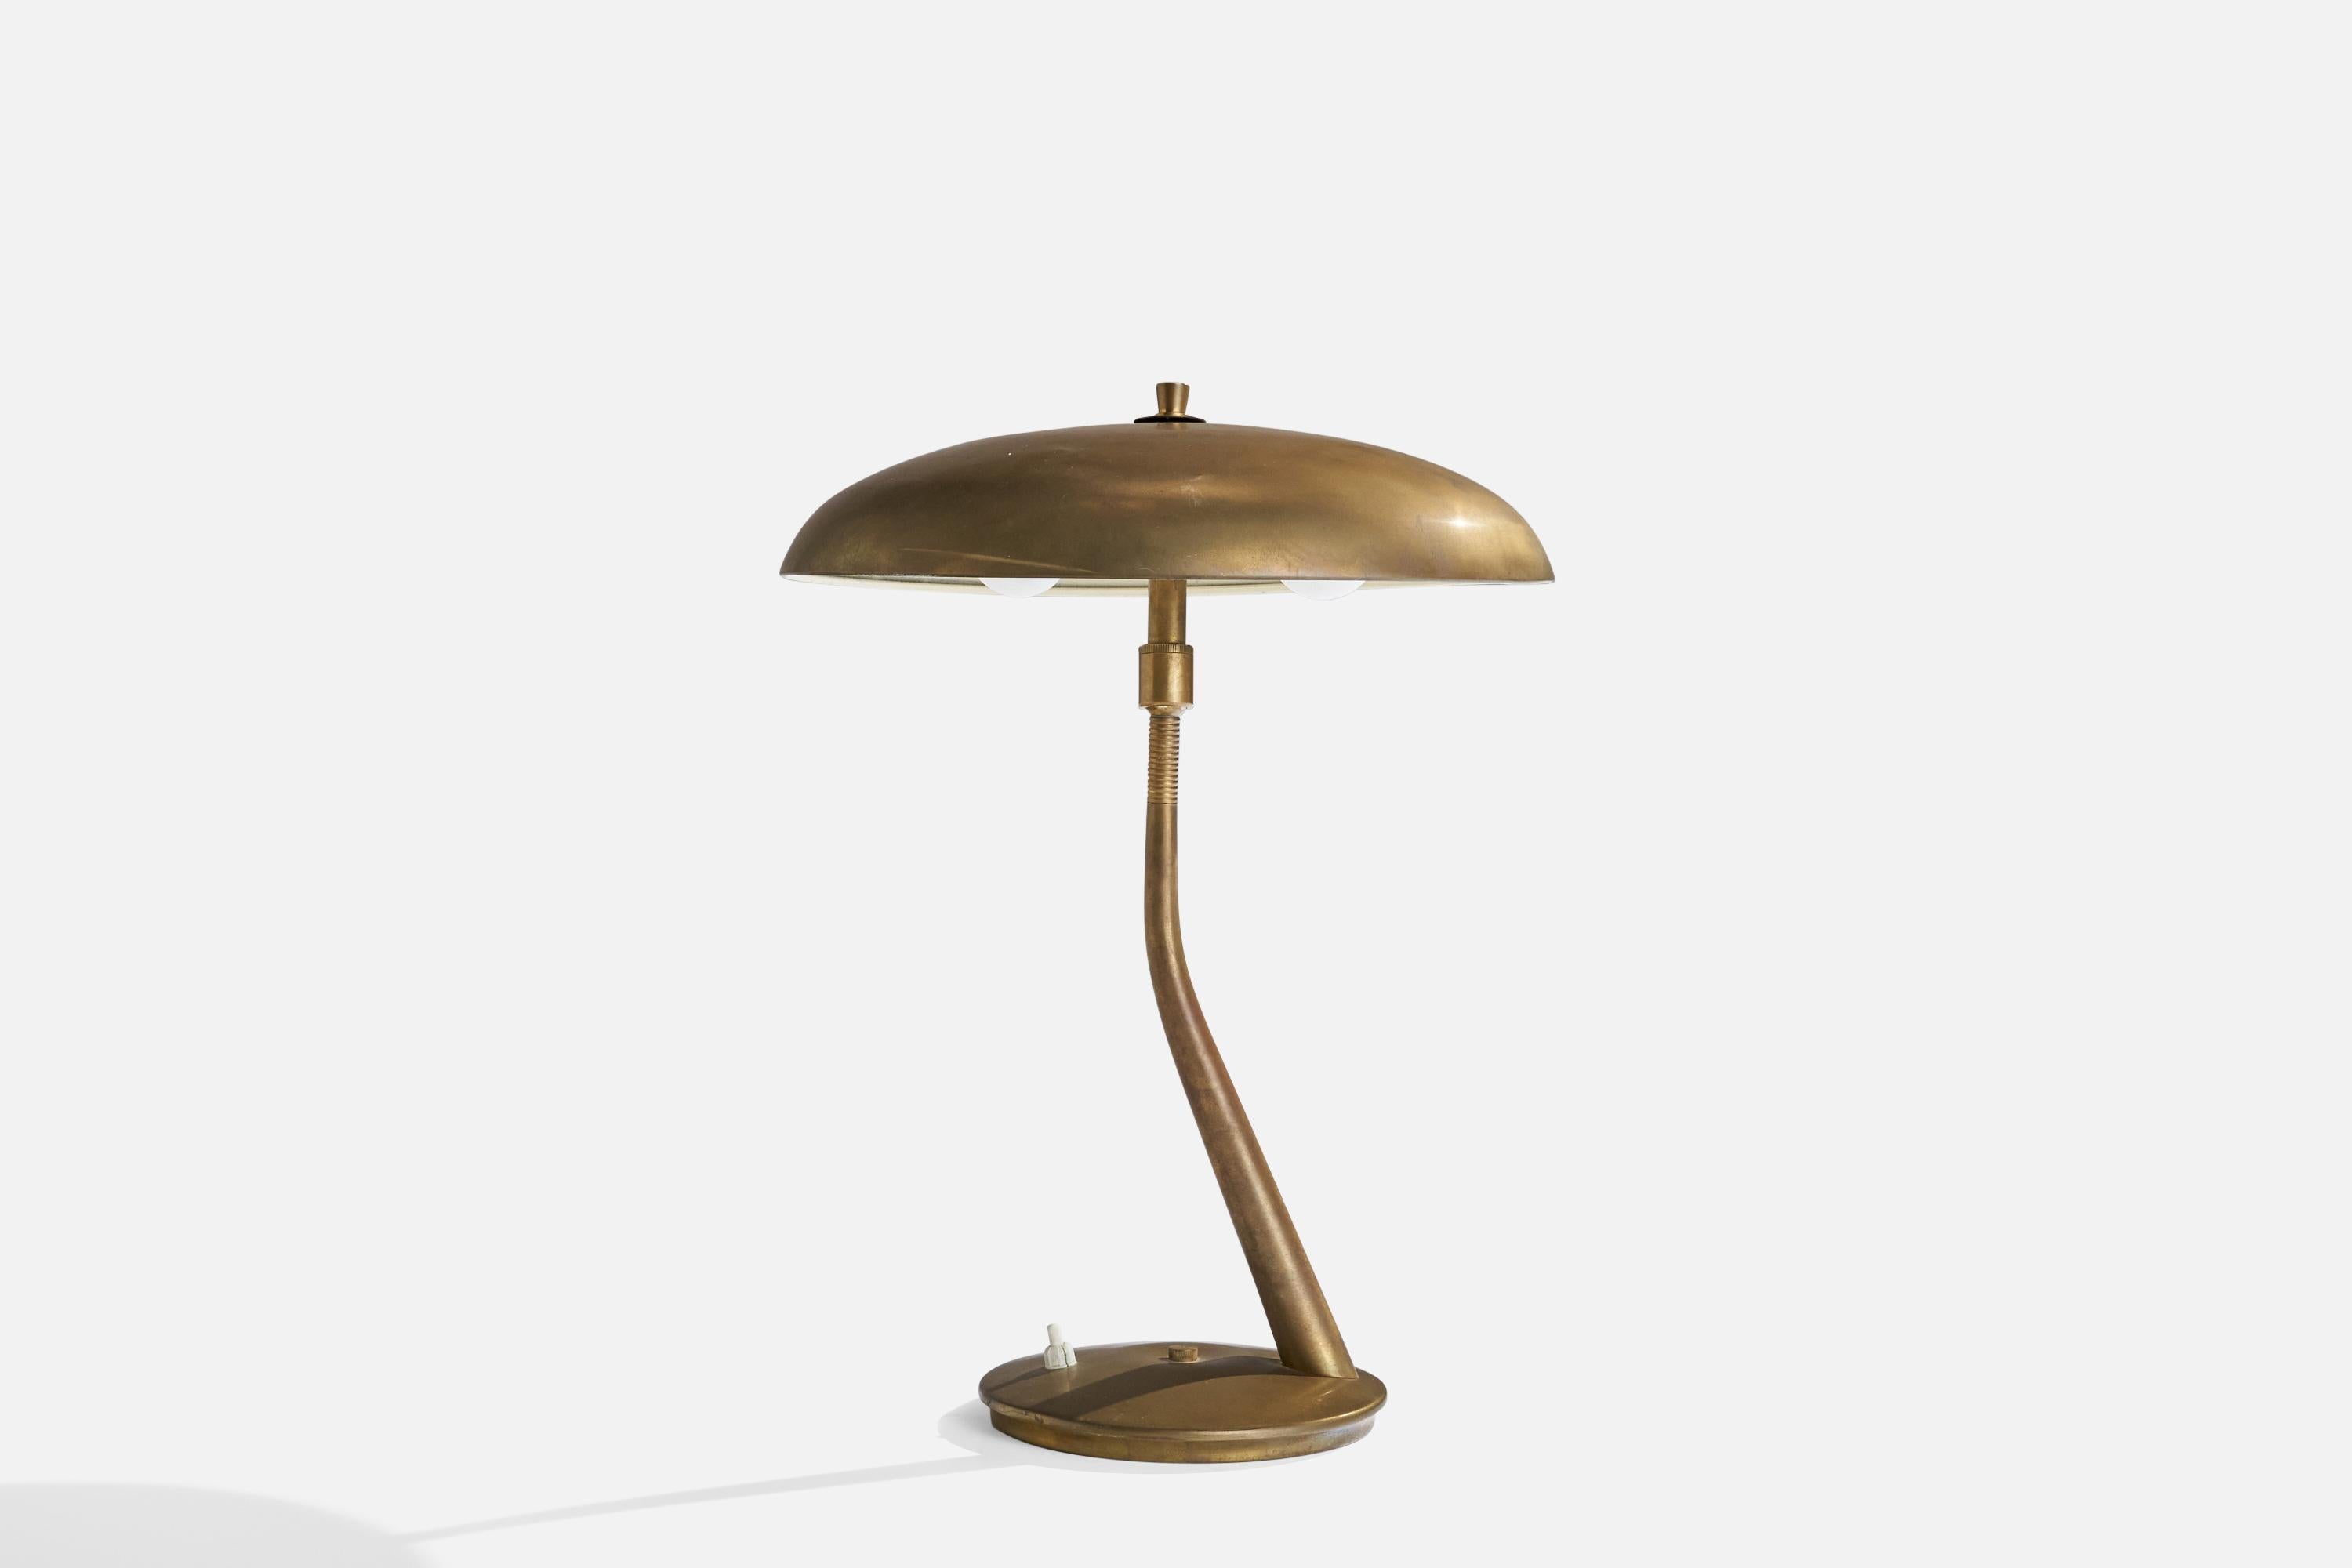 An adjustable brass table lamp designed and produced by Lumen Milano, Italy, 1950s.

Overall Dimensions (inches): 17.5” H x 12.5” D
Stated dimensions include shade.
Bulb Specifications: E-14 Bulb
Number of Sockets: 2
All lighting will be converted